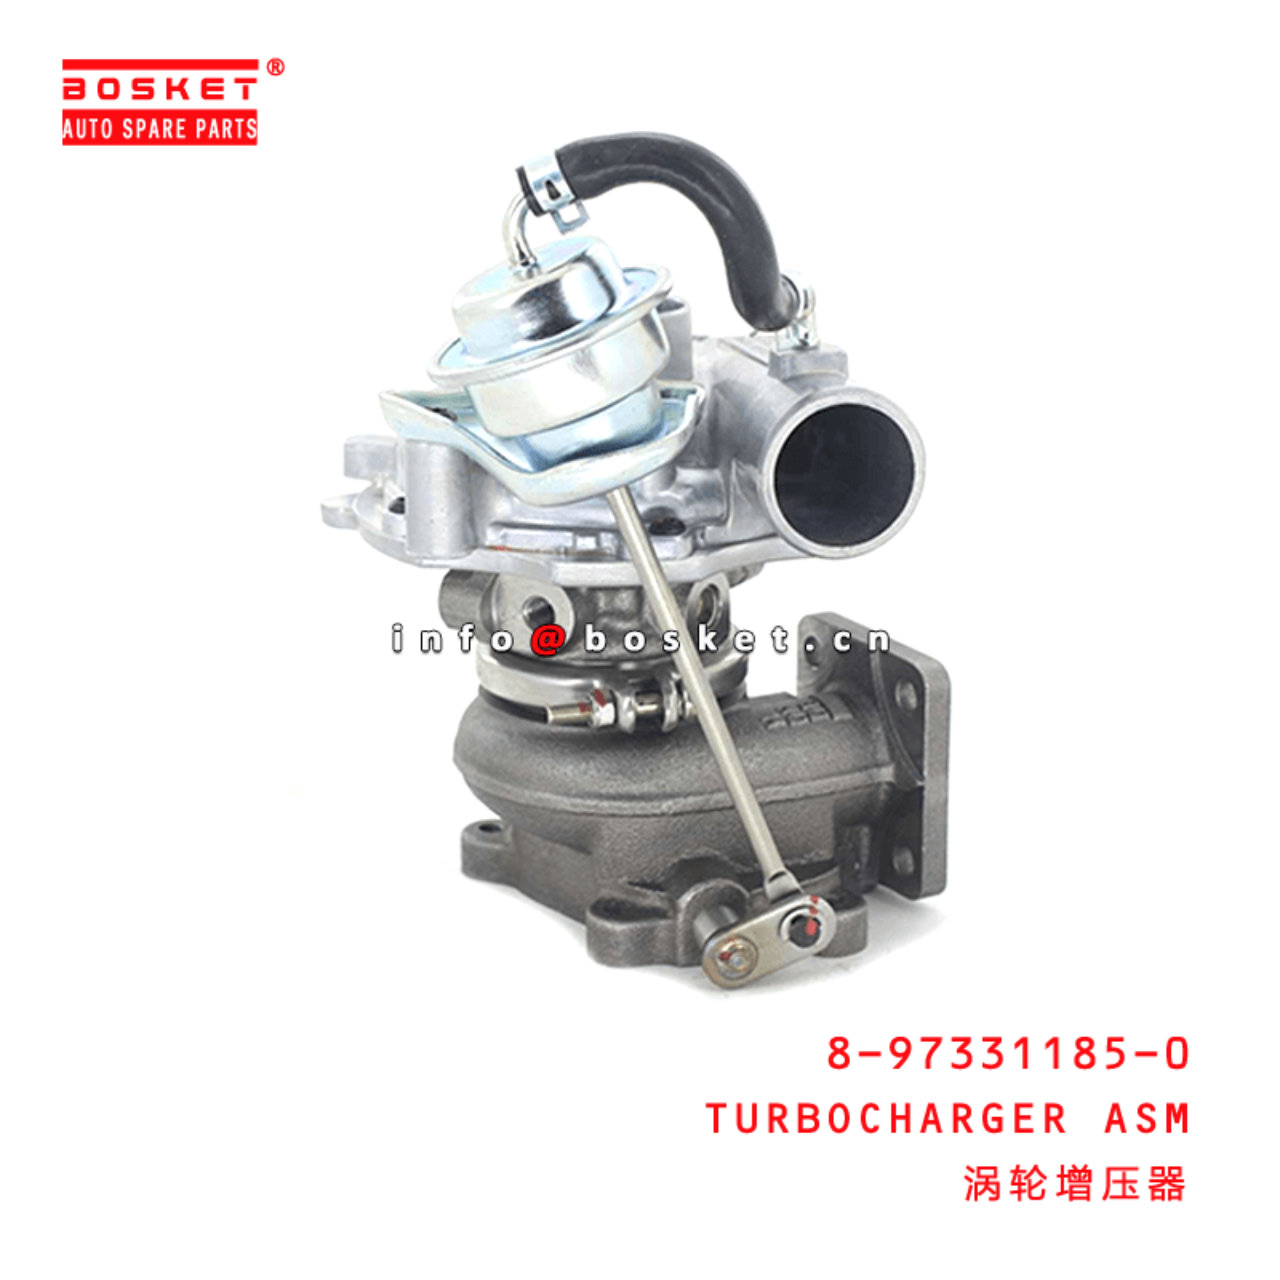 8-97331185-0 Turbocharger Assembly 8973311850 Suitable for ISUZU 